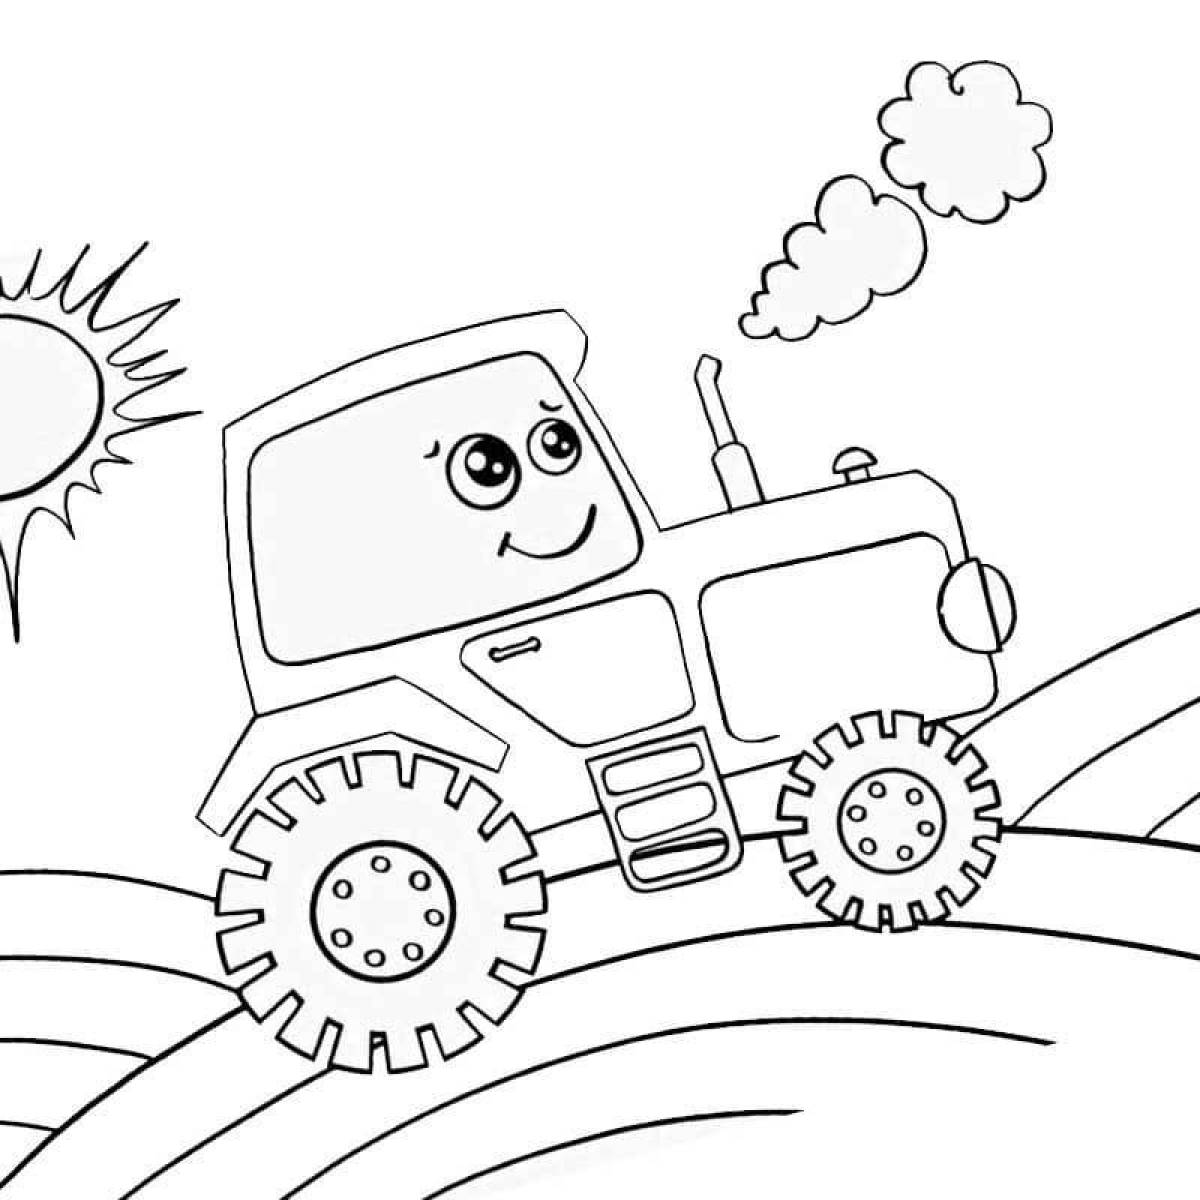 Great blue tractor coloring book